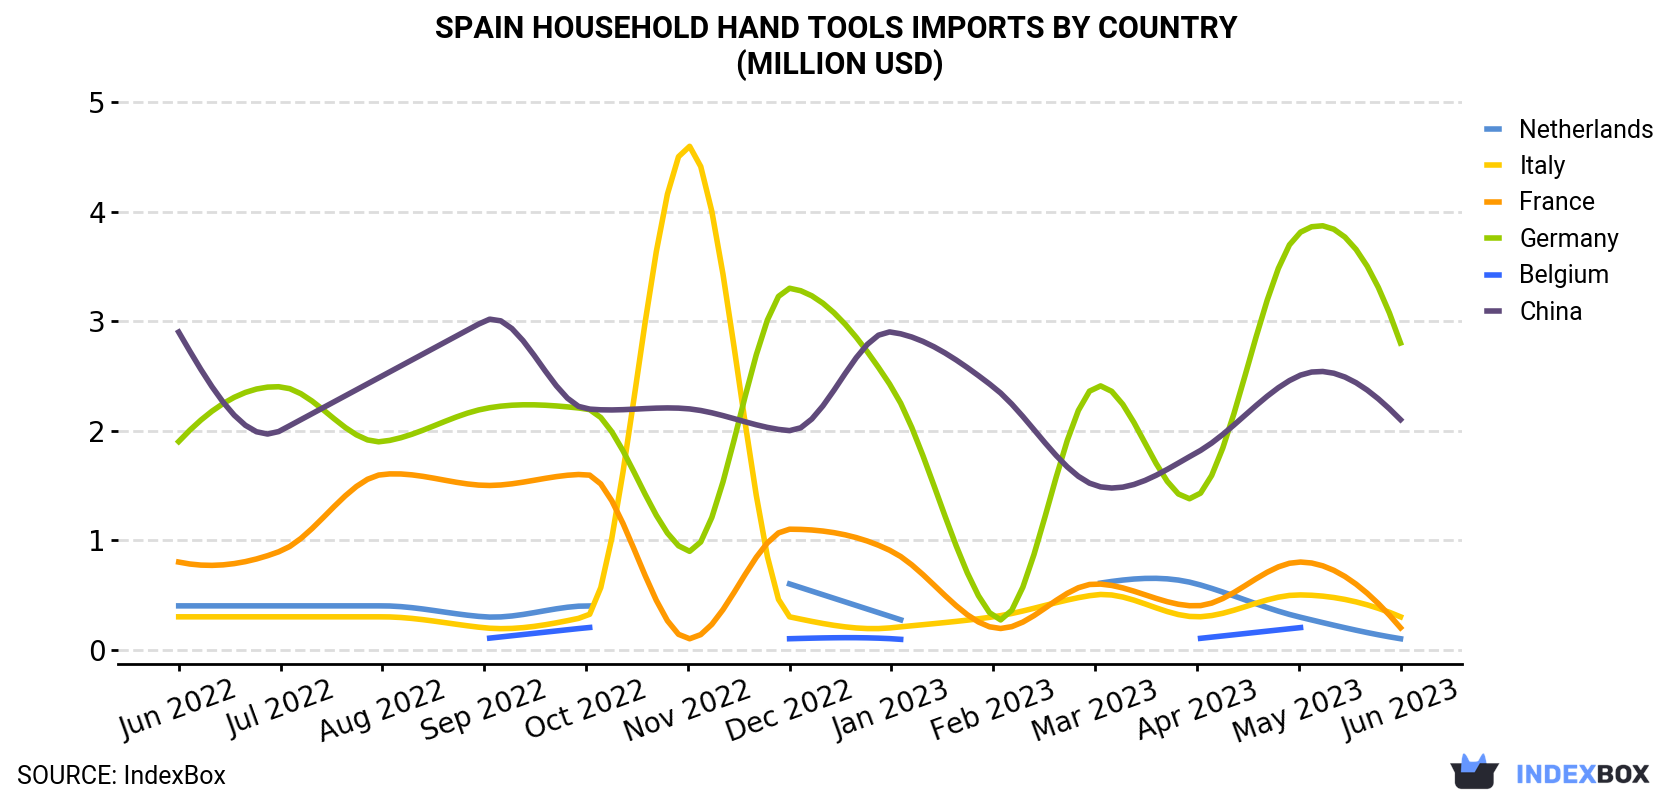 Spain Household Hand Tools Imports By Country (Million USD)